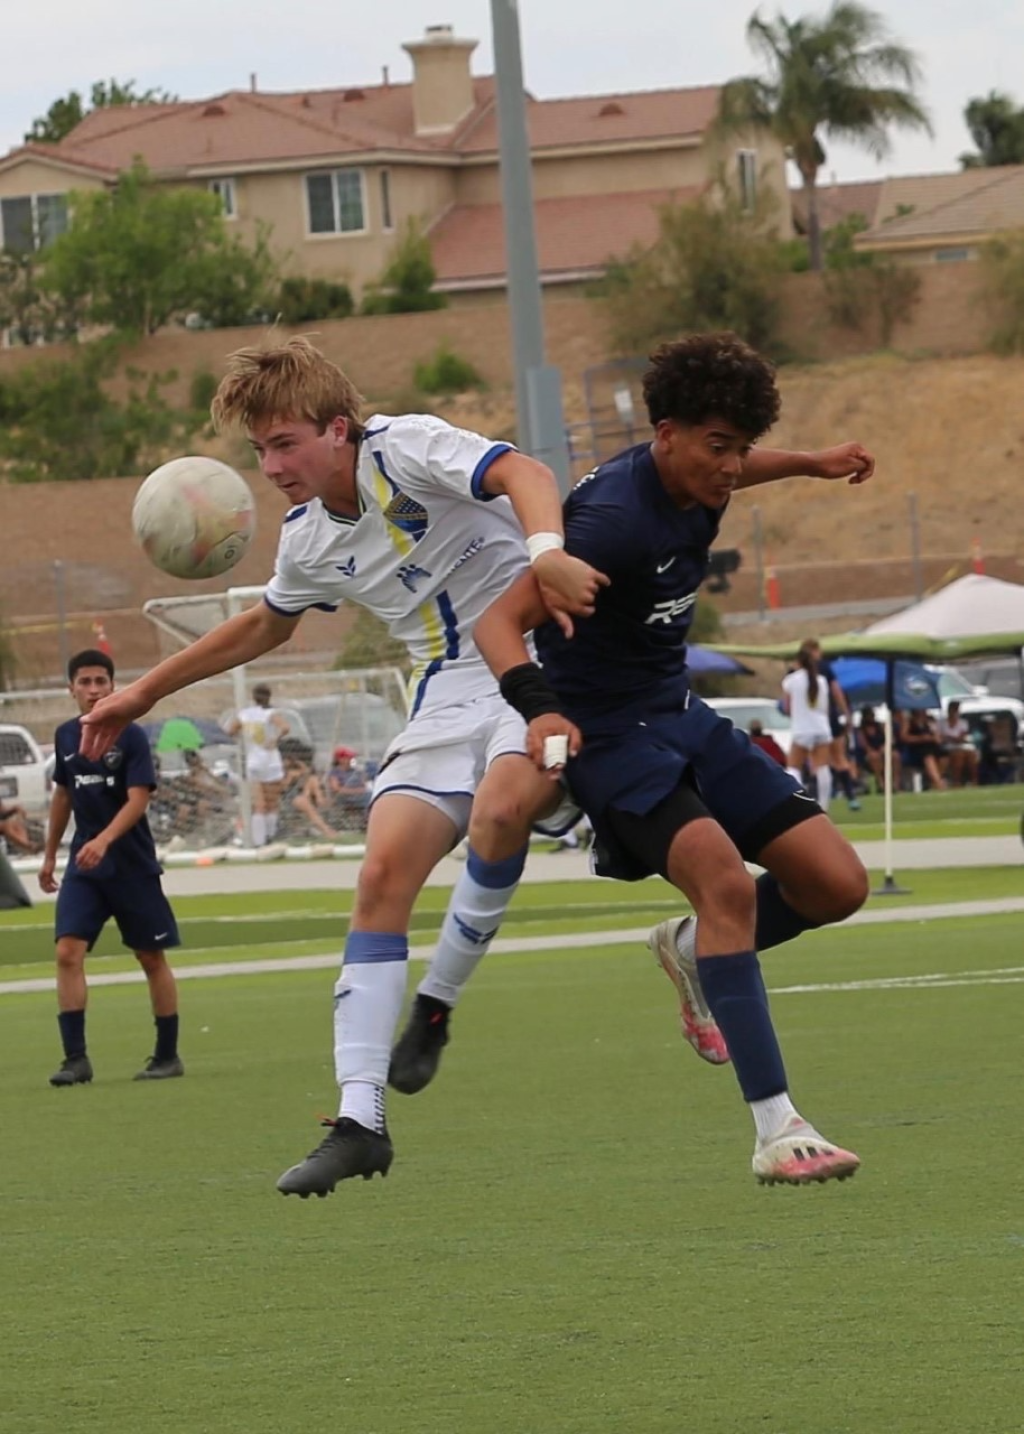 Cardiff Sockers team wins 2022 Cal South State Cup Soccer Championship